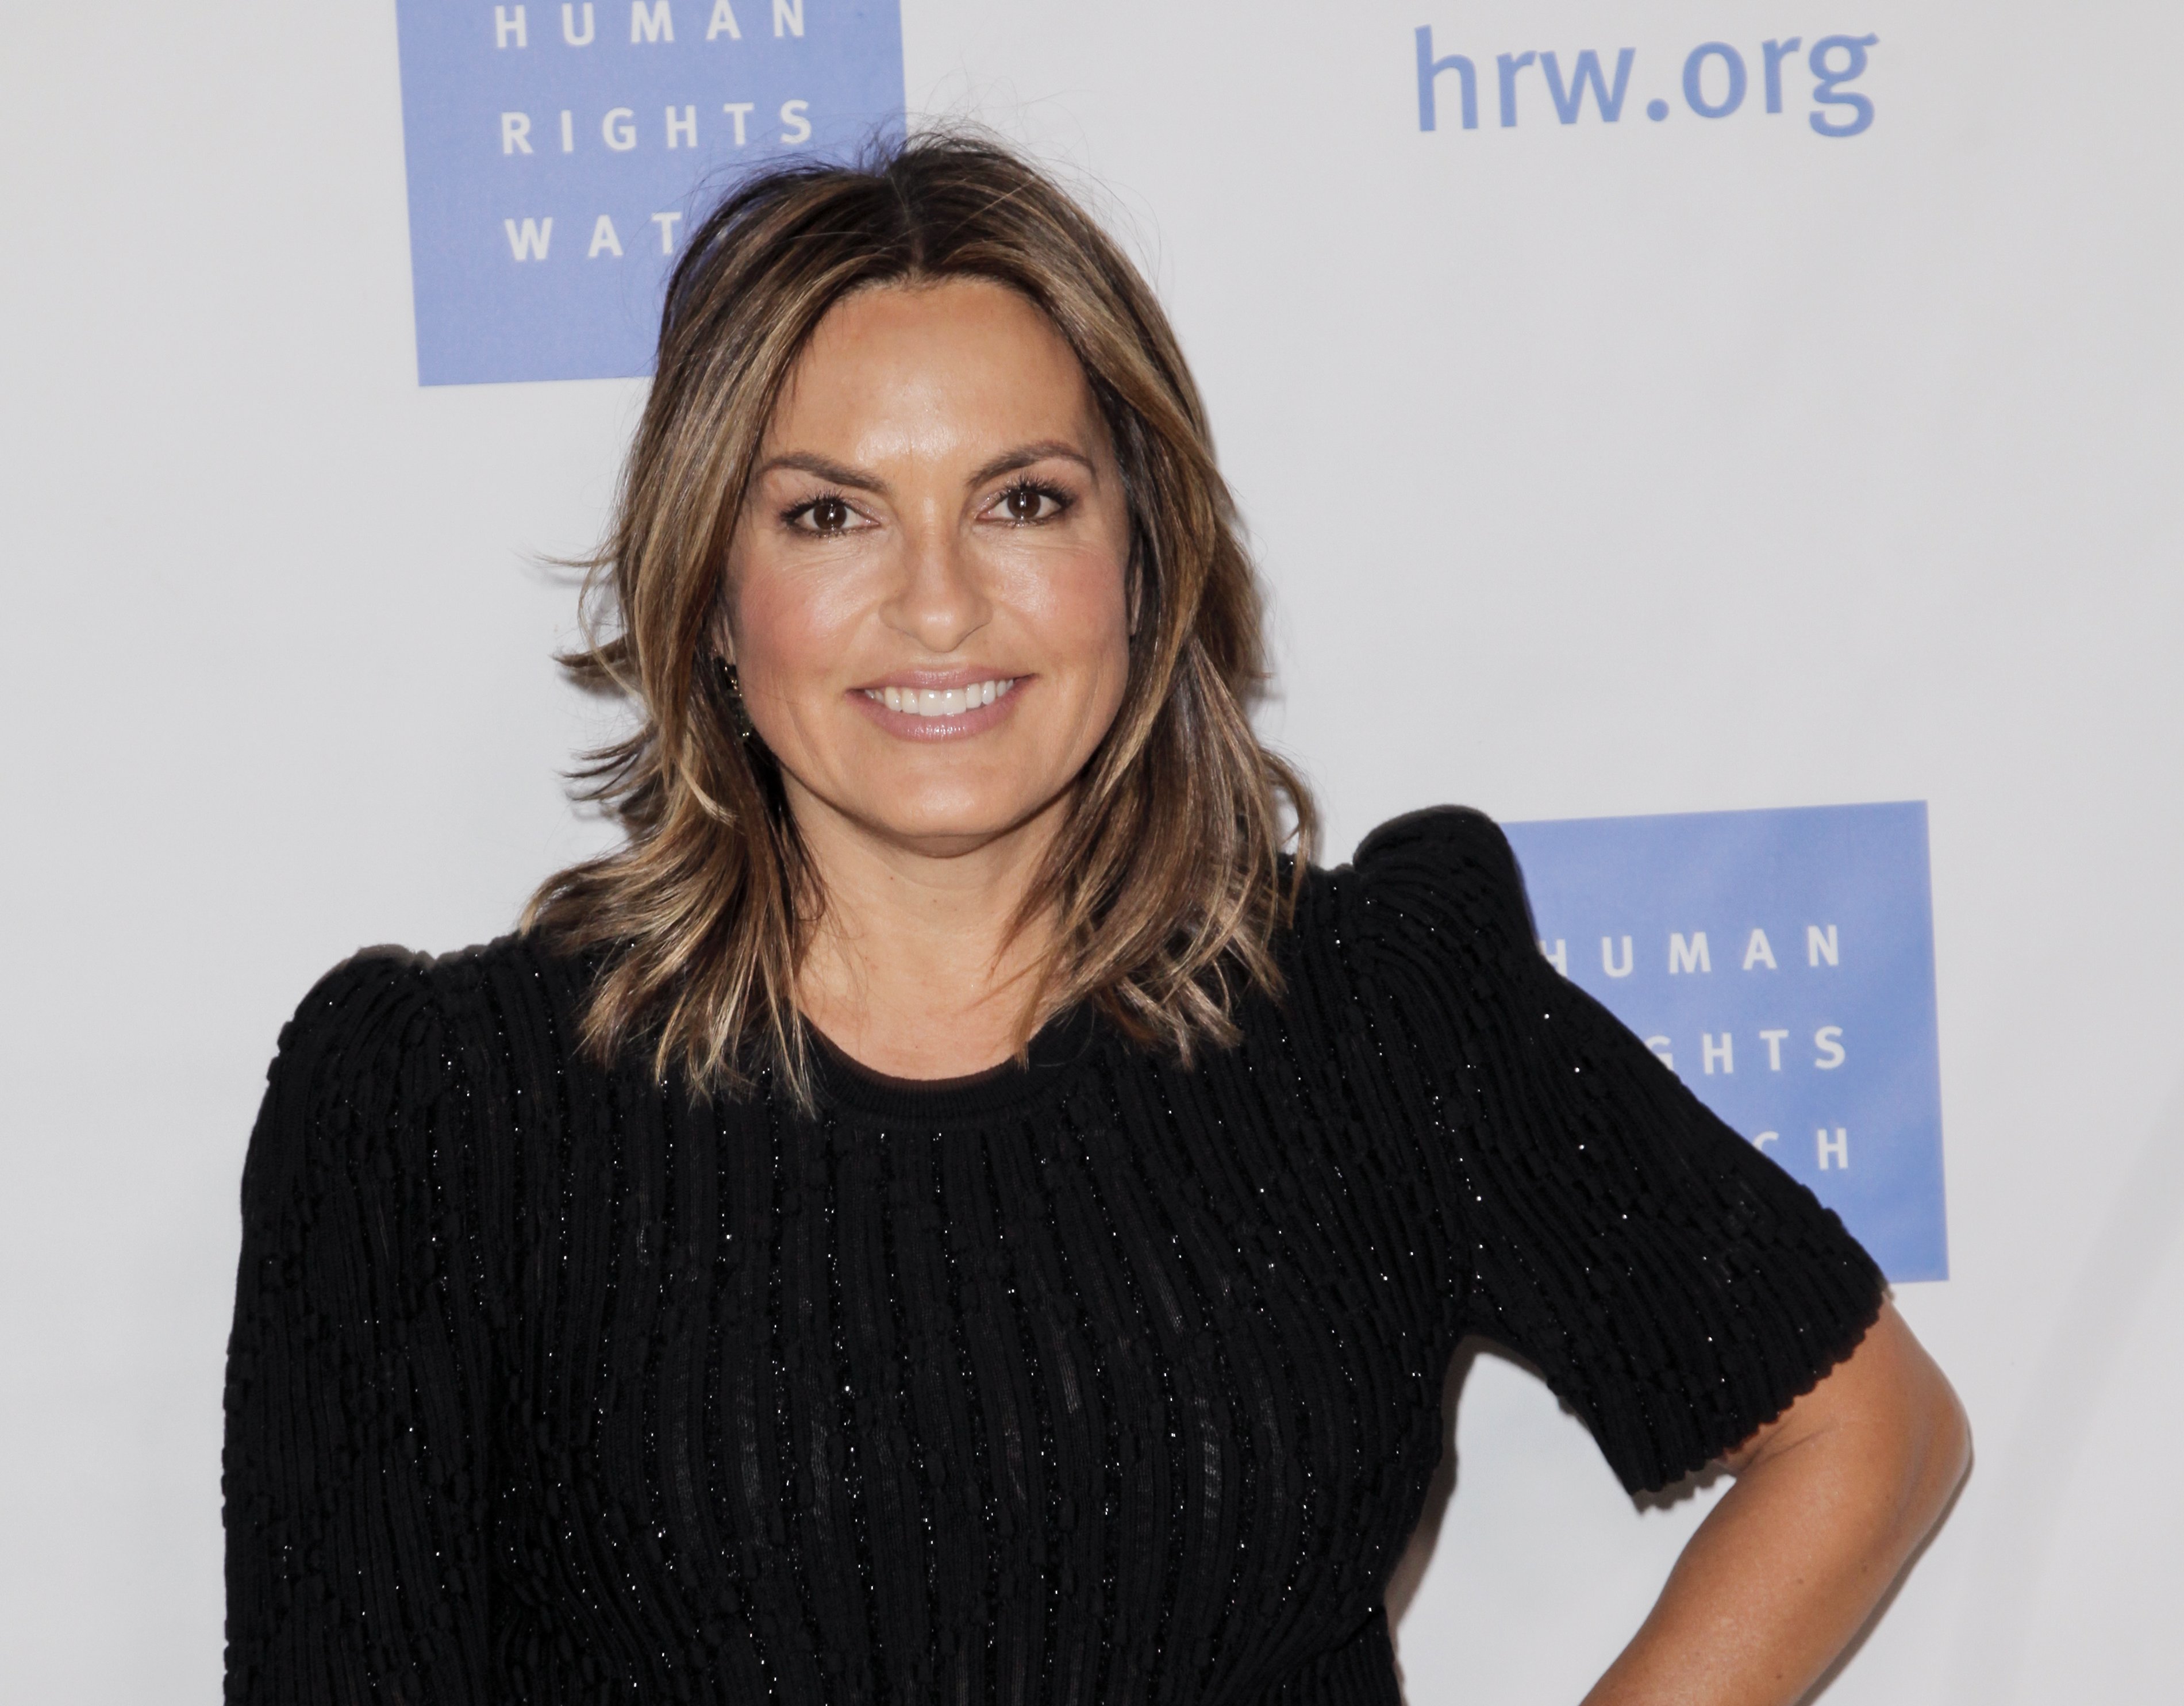 Mariska Hargitay attends the Voices for Justice Dinner in Beverly Hills, California on November 13, 2018 | Photo: Getty Images